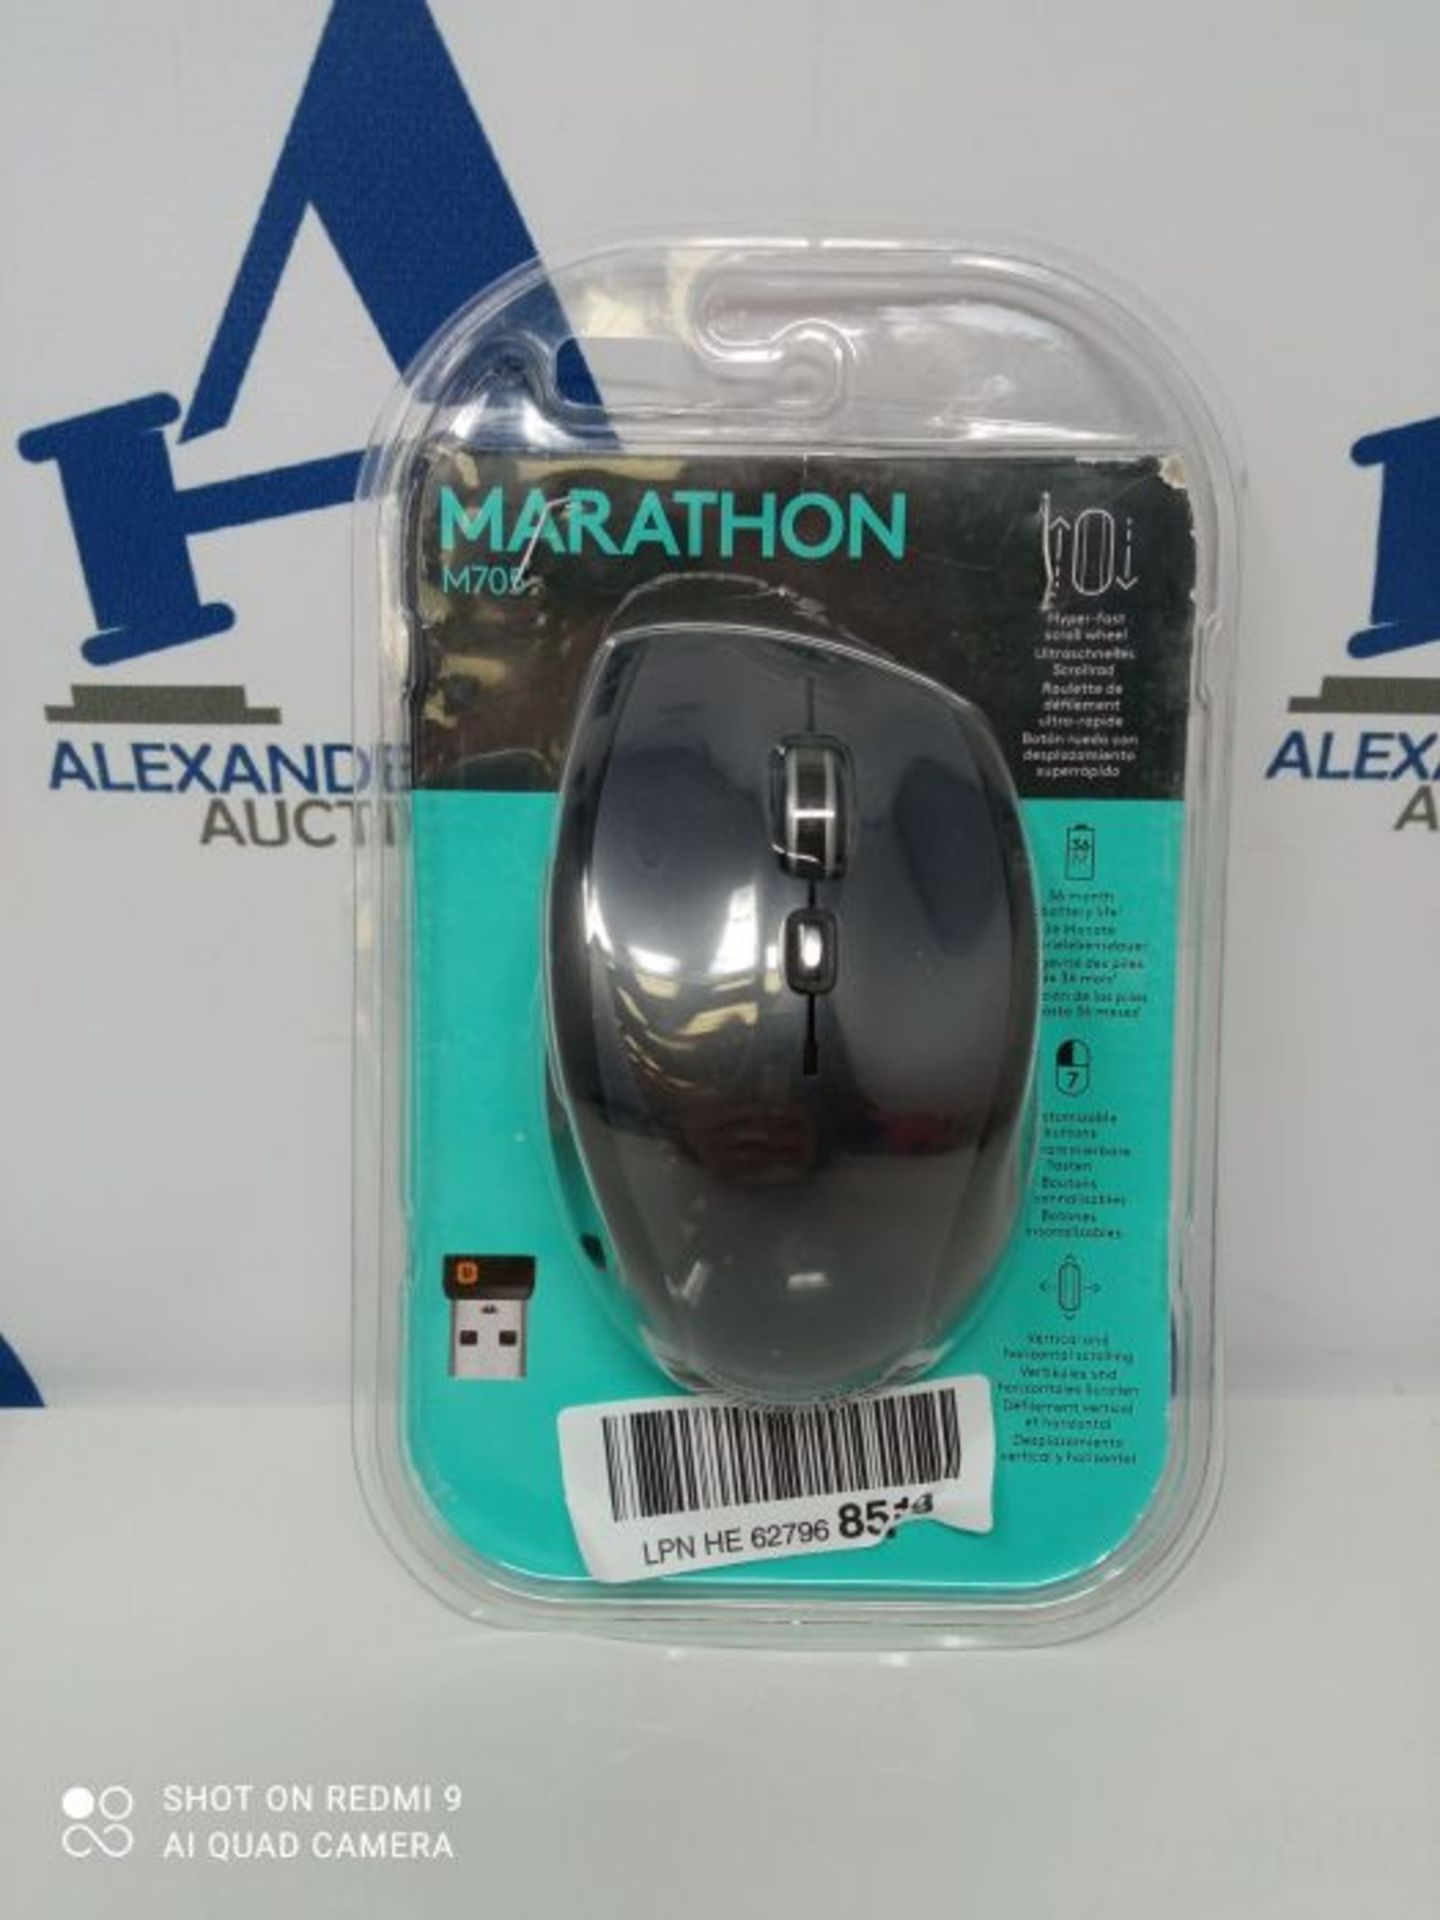 Logitech M705 Marathon Wireless Mouse, 2.4 GHz with USB Unifying Mini-Receiver, 1000 D - Image 2 of 3